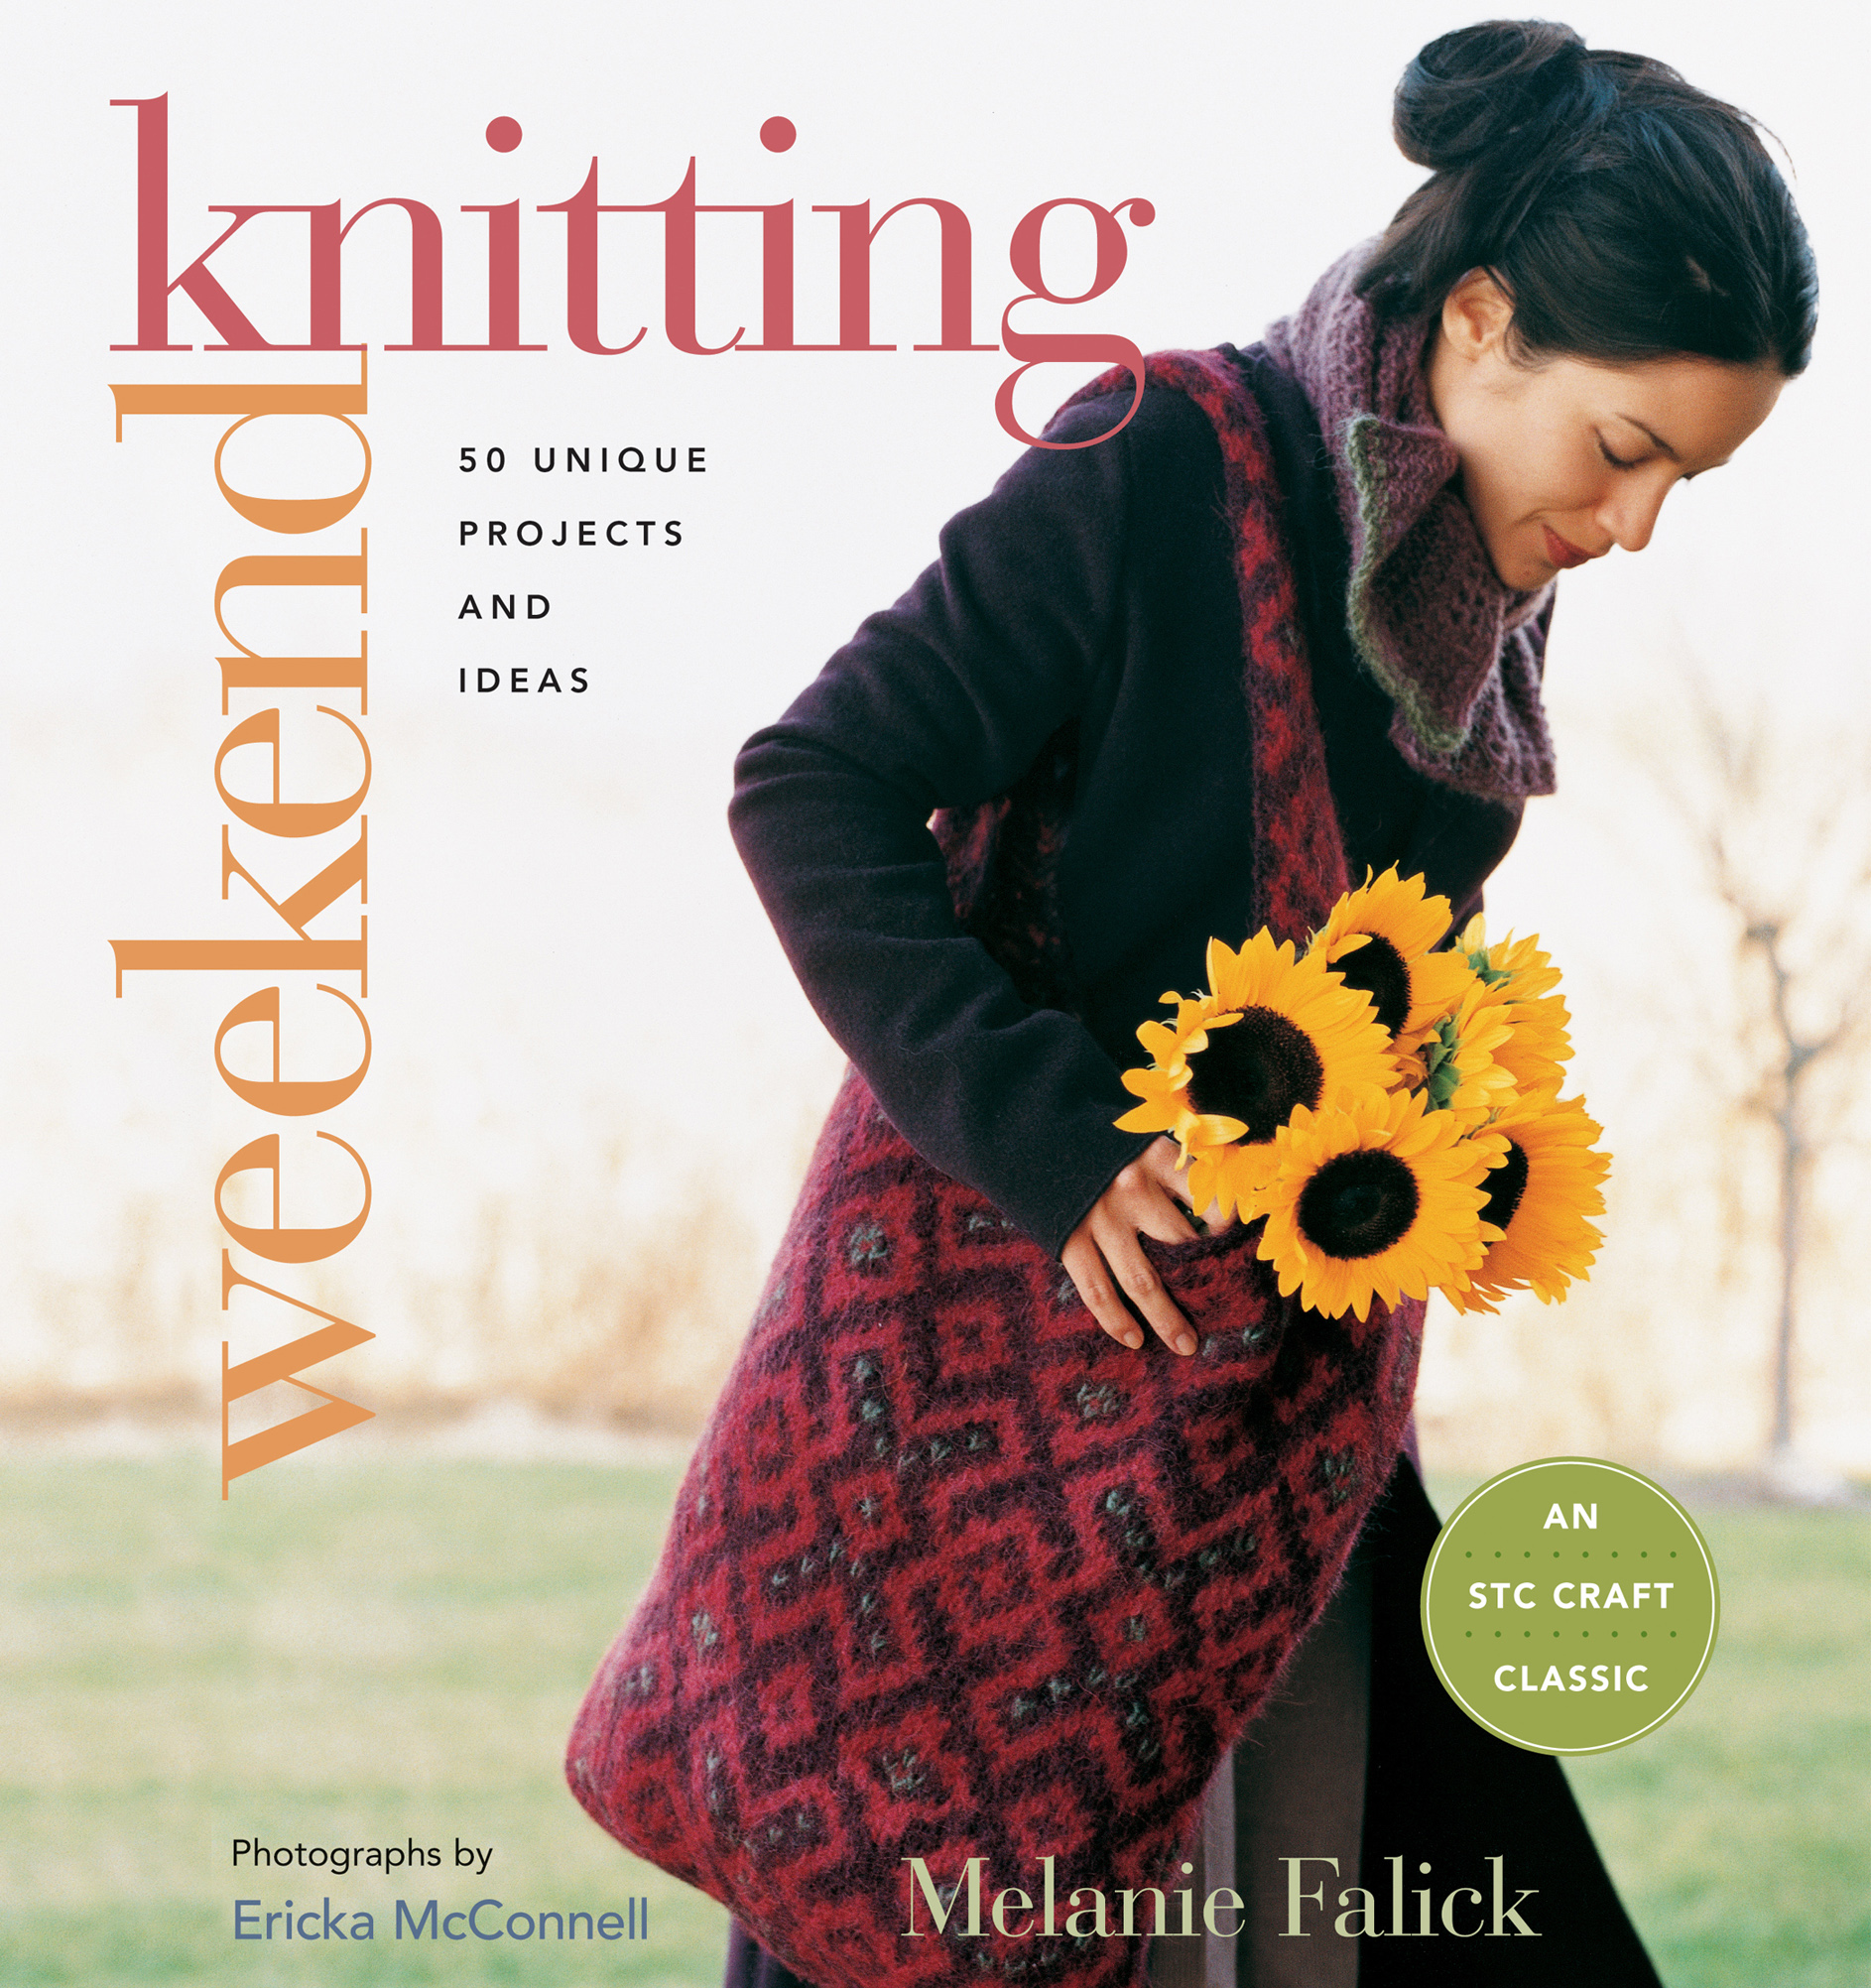 Weekend knitting 50 unique projects and ideas cover image